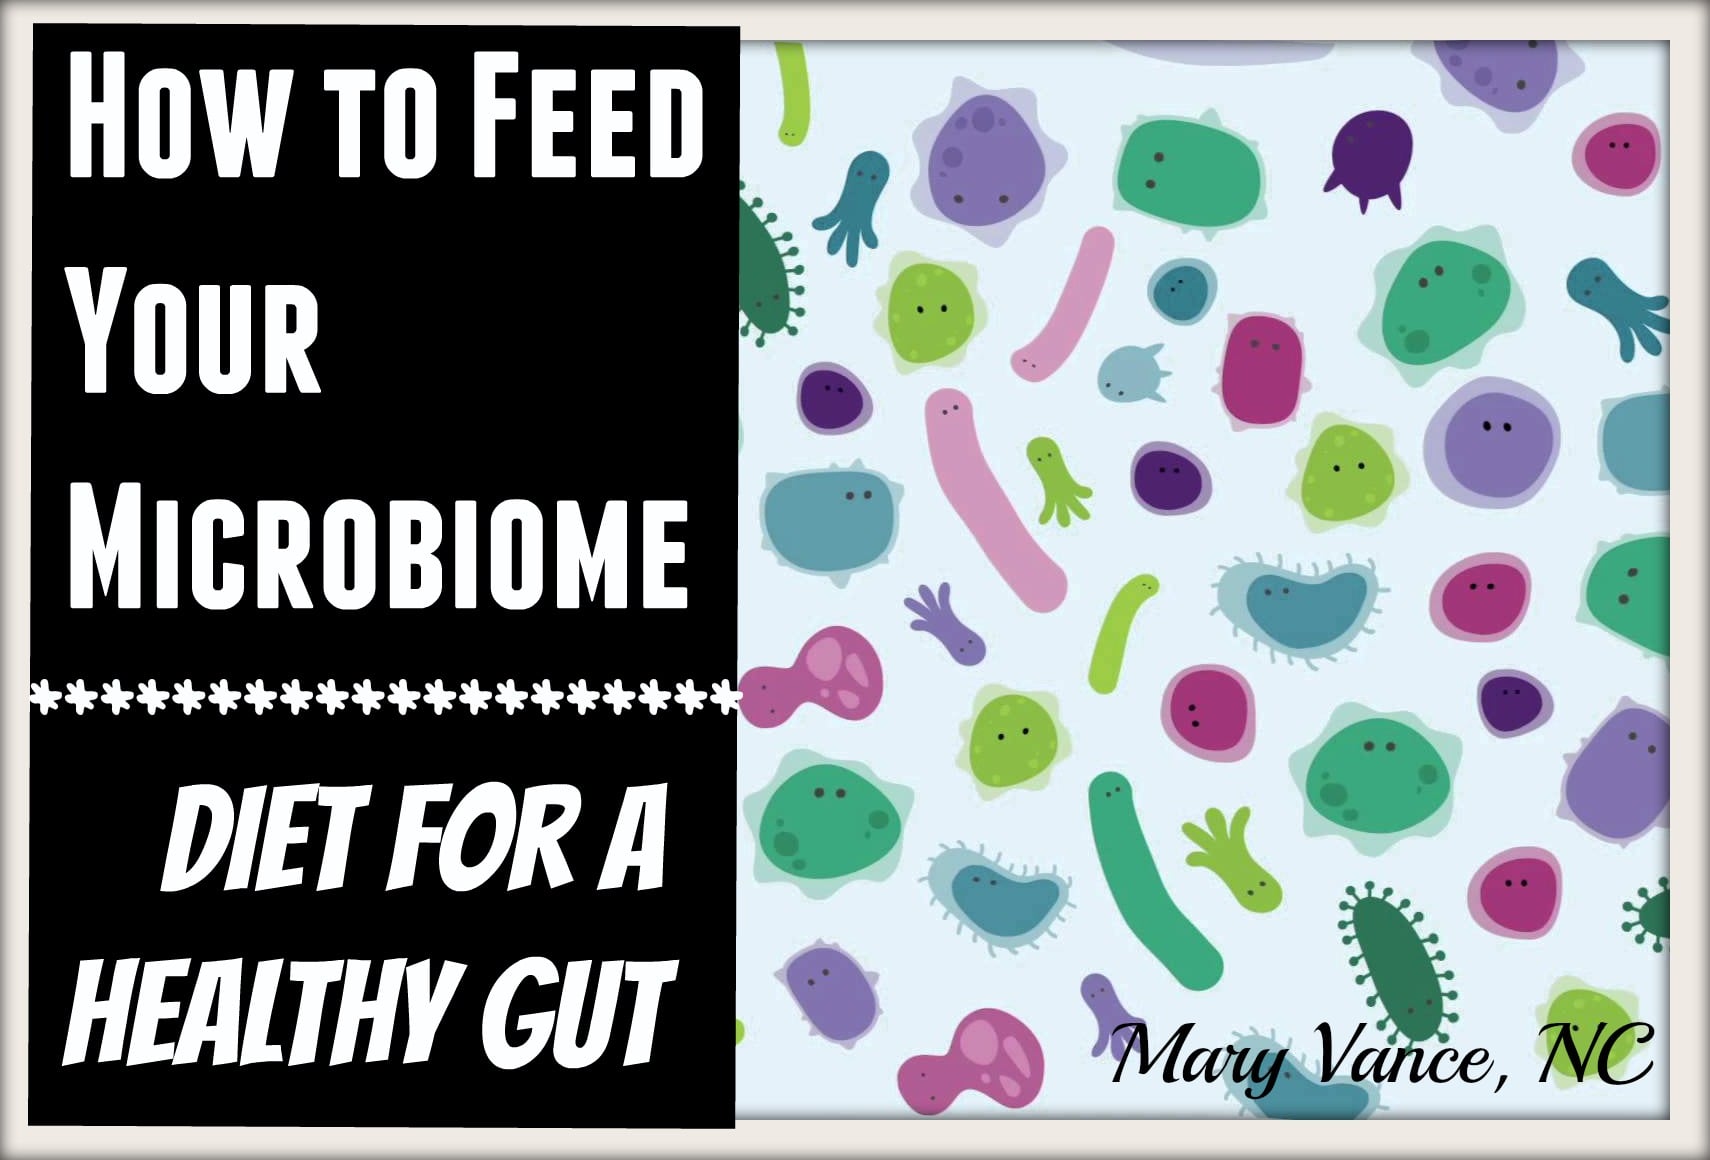 How to Feed Your Microbiome: Diet for a Healthy Gut